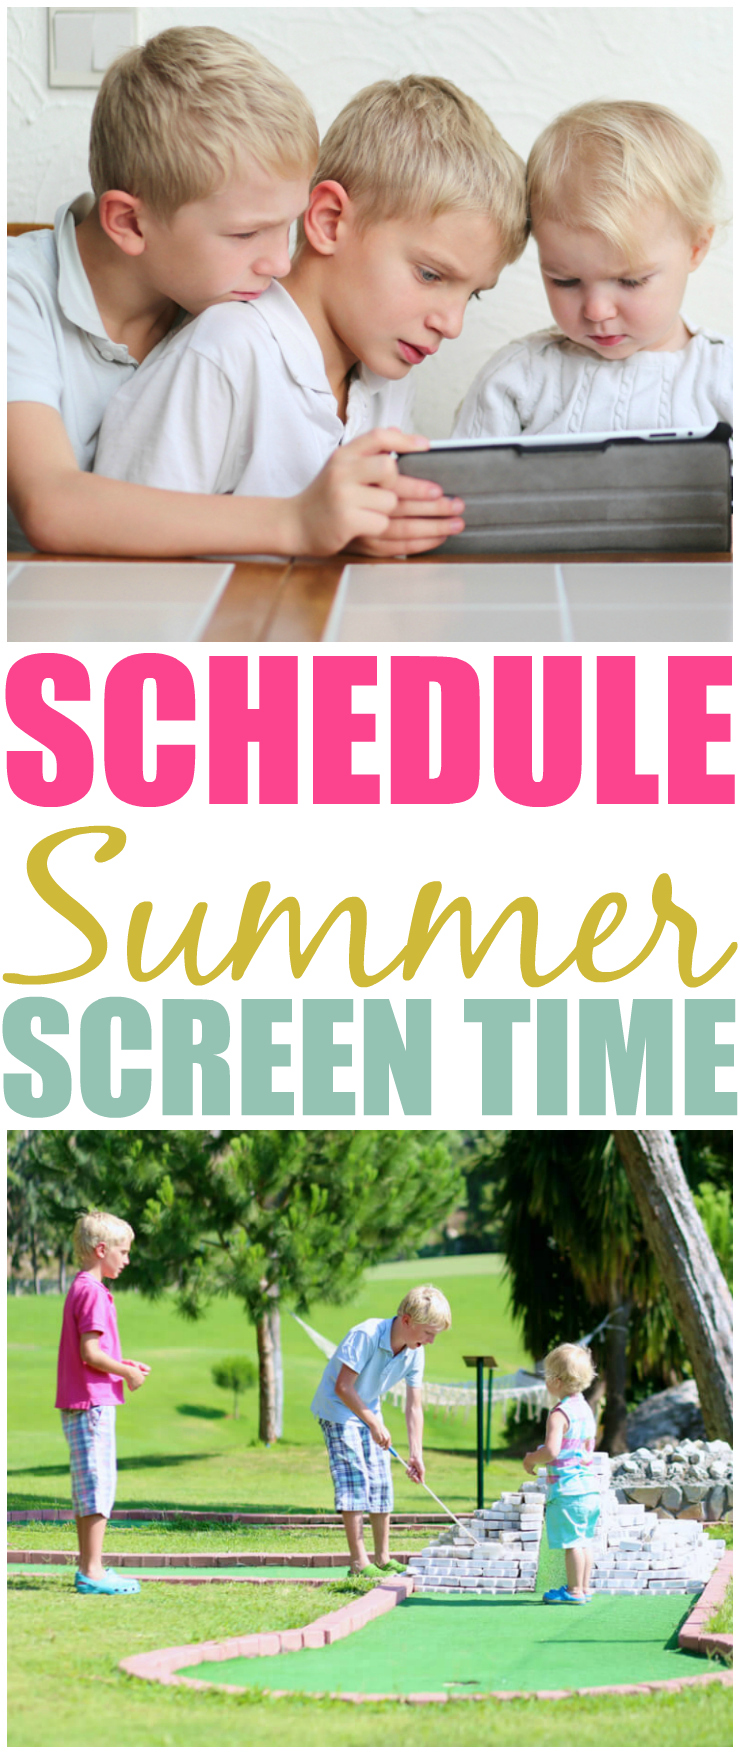 Setting A Schedule For Screen Time This Summer Facebook 2